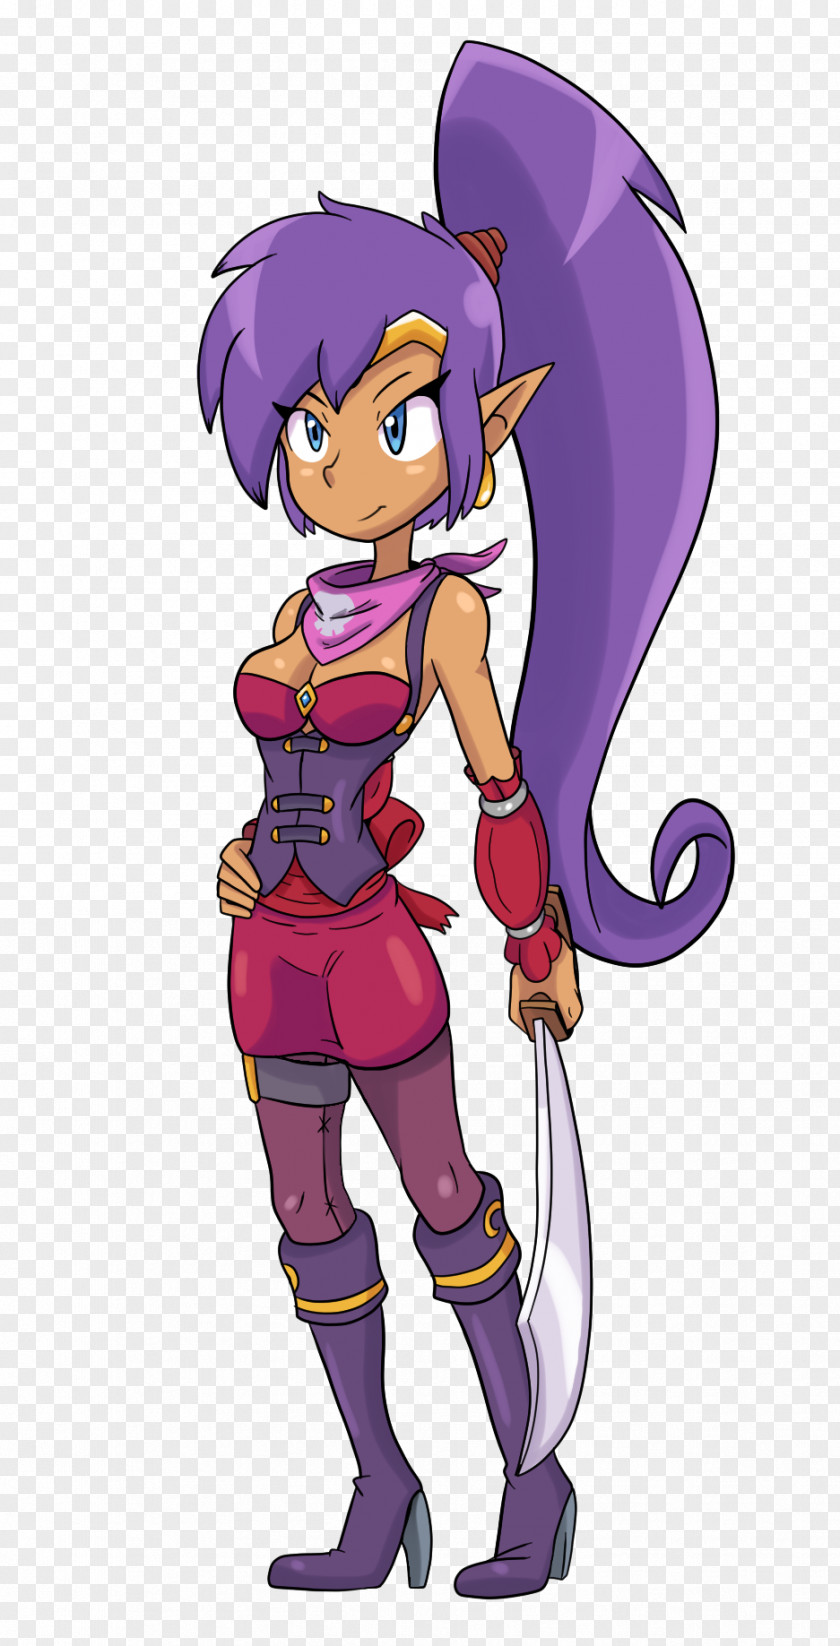 Shantae And The Pirate's Curse Fan Art Video Game DeviantArt Xbox One PNG